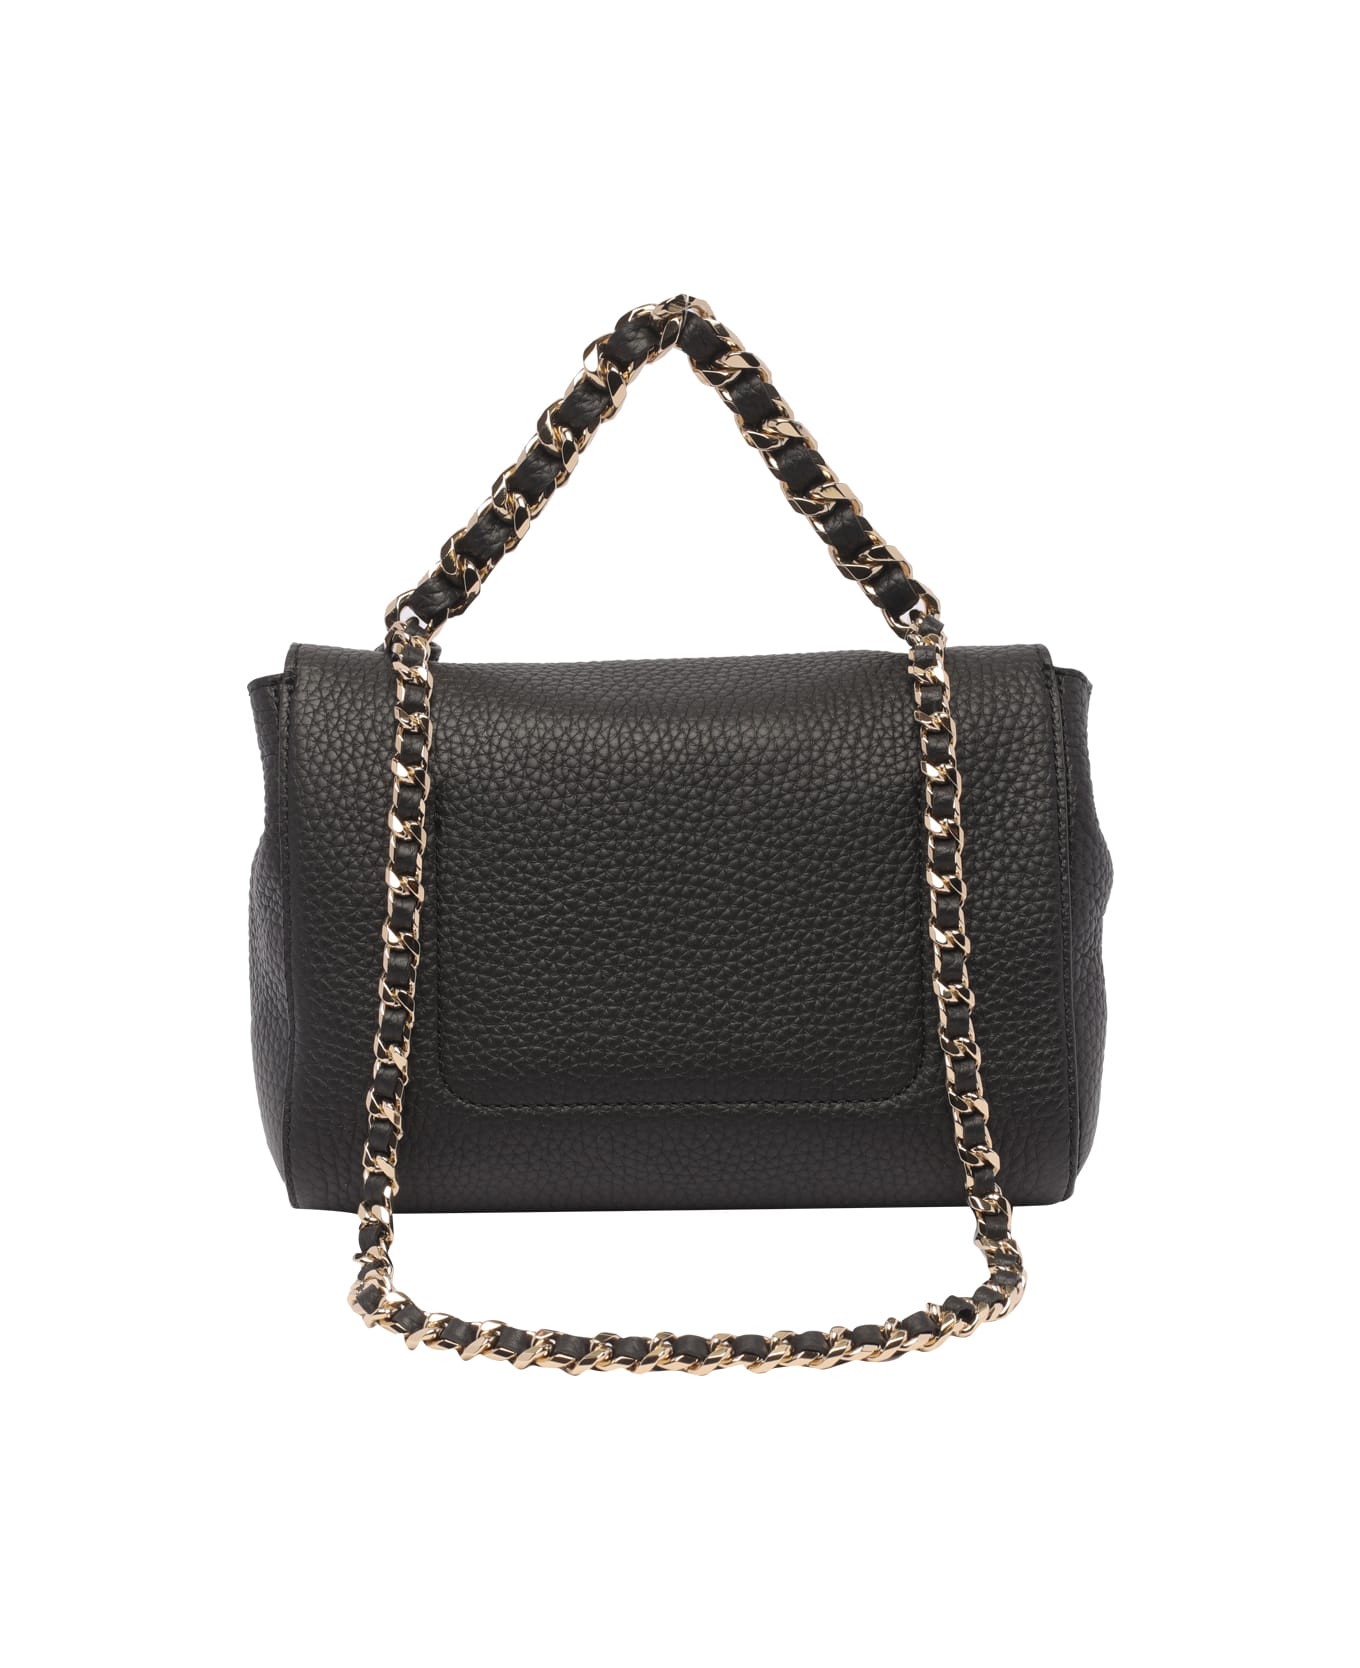 Mulberry Lily Top Handle Crossbody Bag - Black